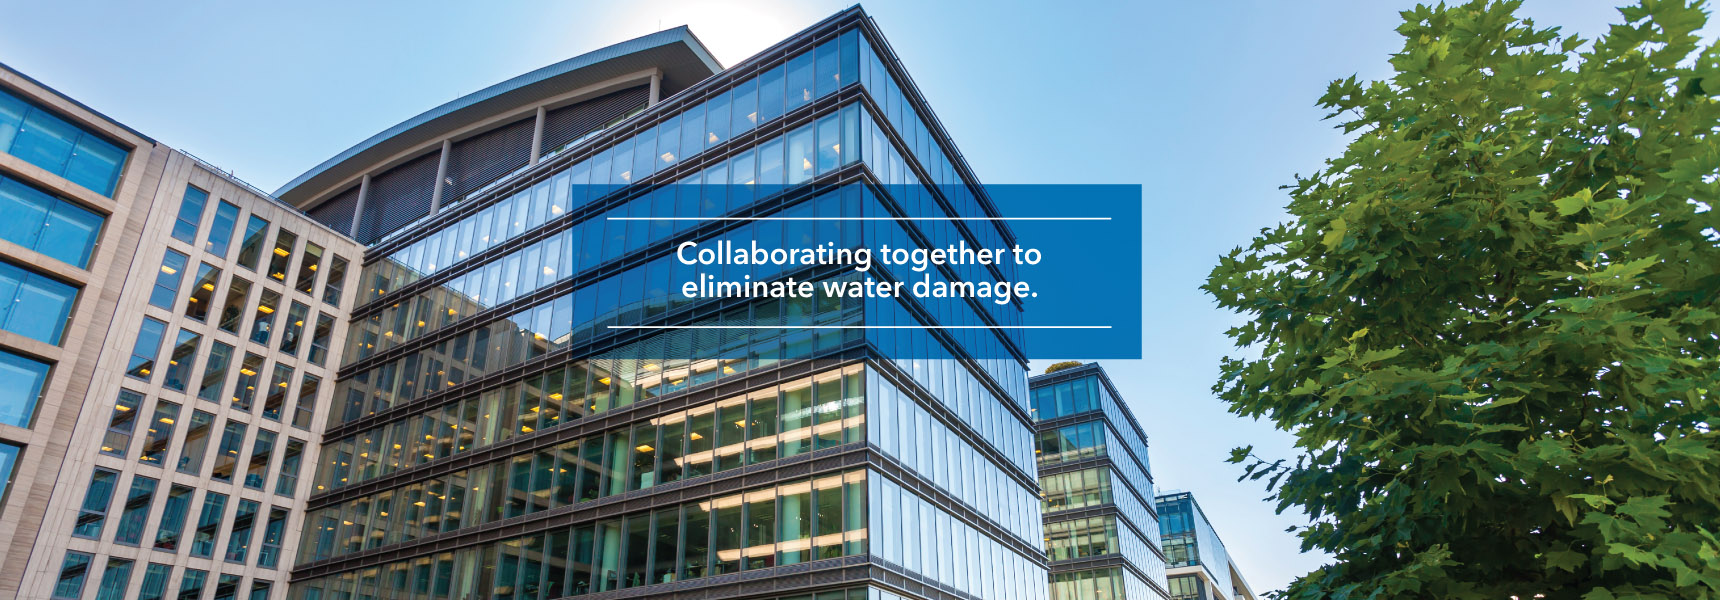 Collaborating together to eliminate water damage.